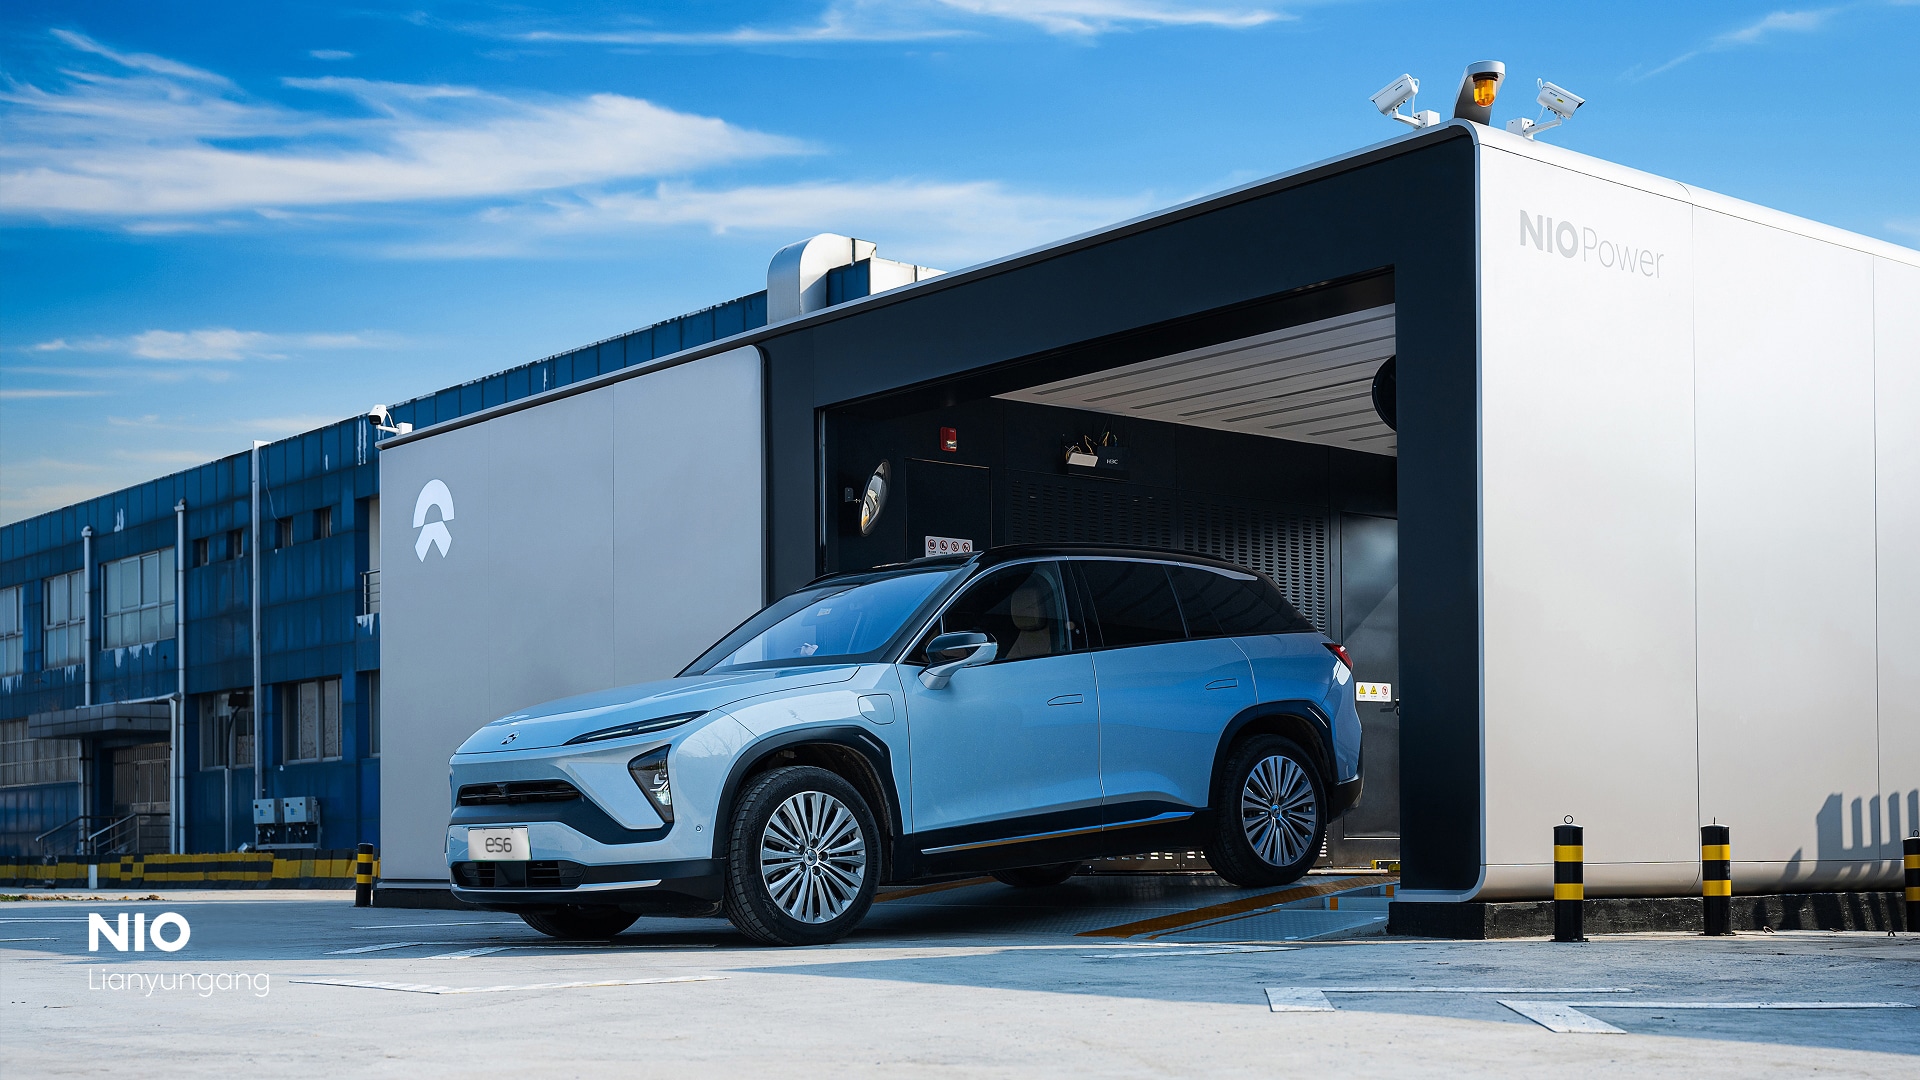 NIO Achieves Annual Target of 700 Battery Swap Stations Ahead of Schedule